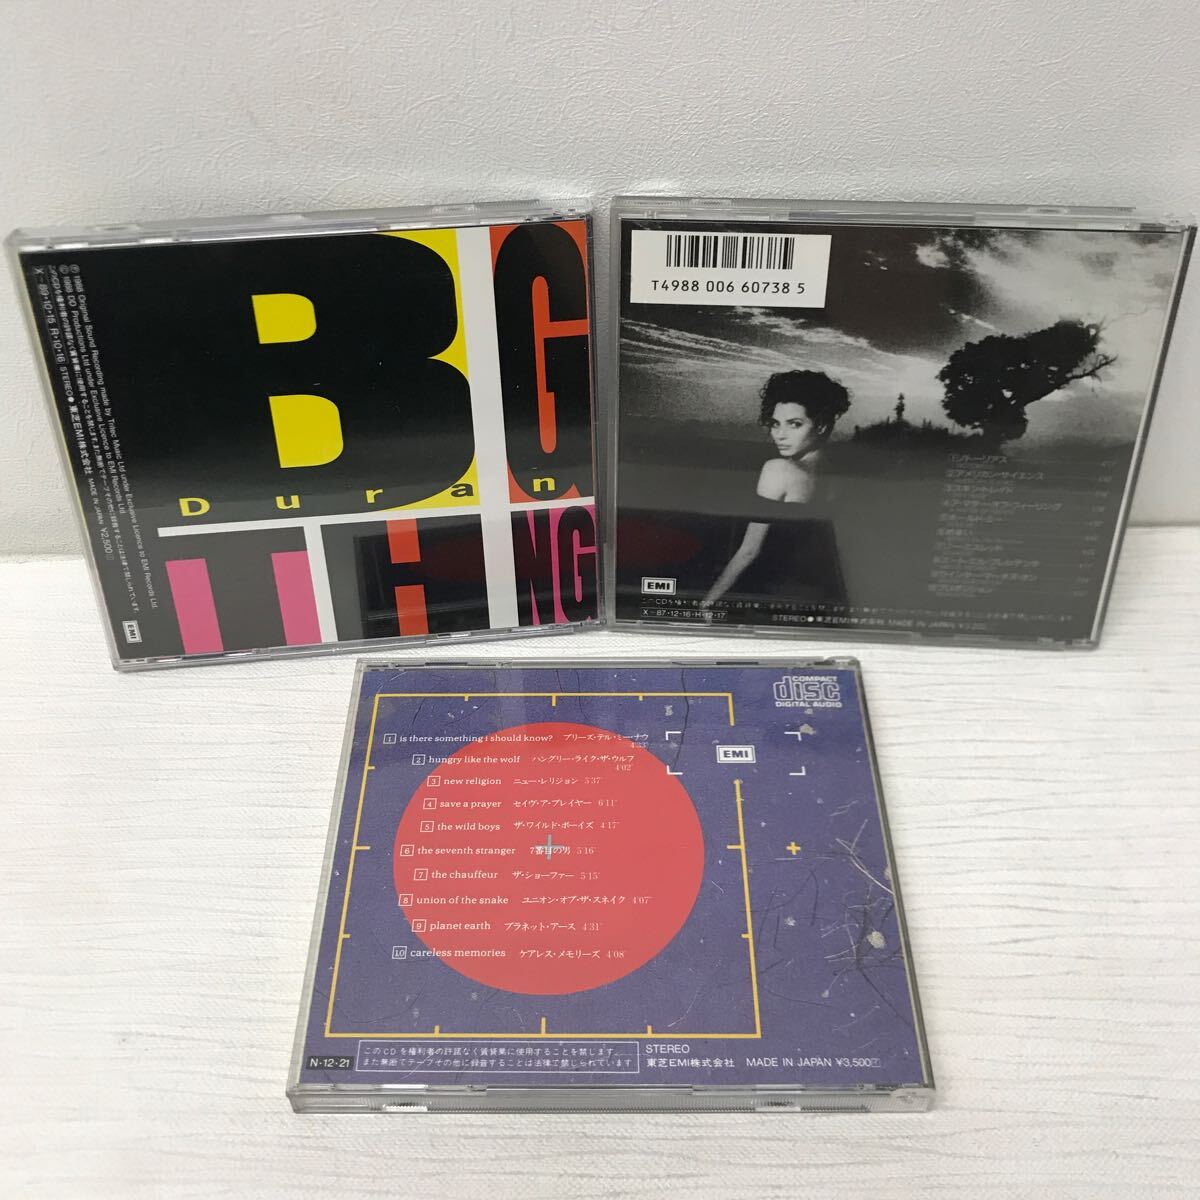 I0413A3 デュラン・デュラン DURAN DURAN CD 6巻セット 音楽 洋楽 / DECADE / SEVEN AND THE RAGGED TIGER / ARENA / BIG THING 他_画像7